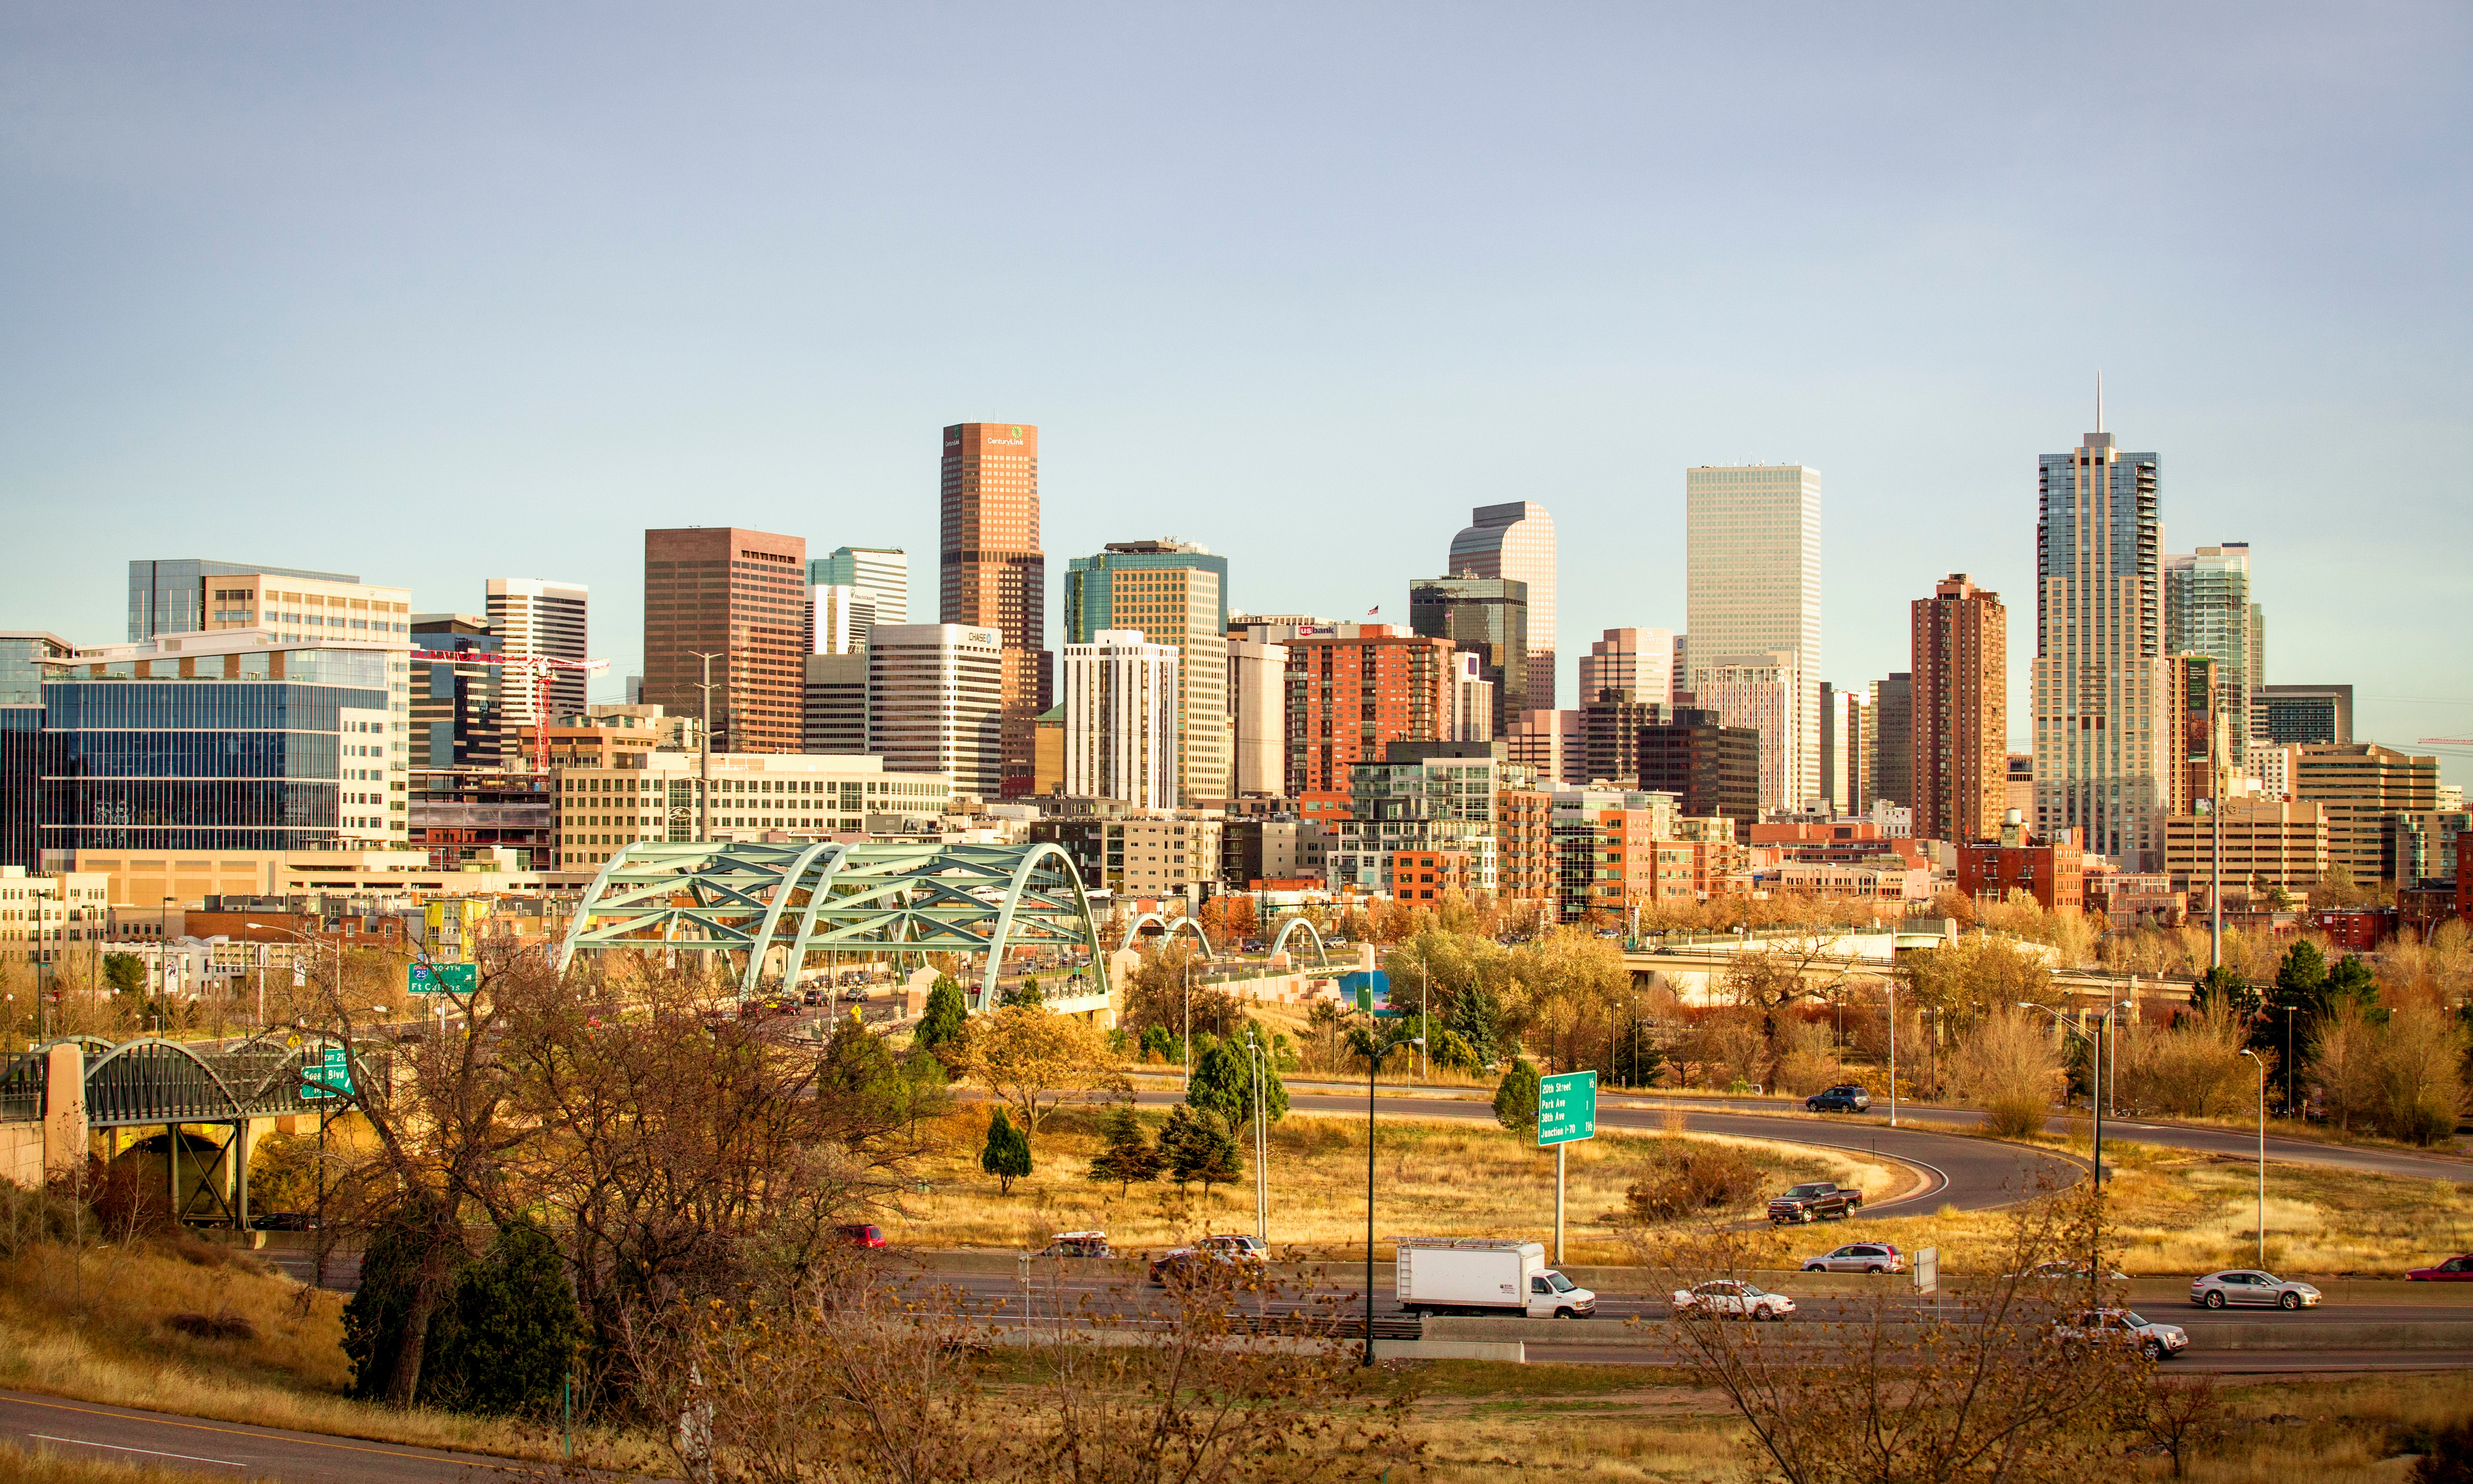 Is Denver a good place to meet people?